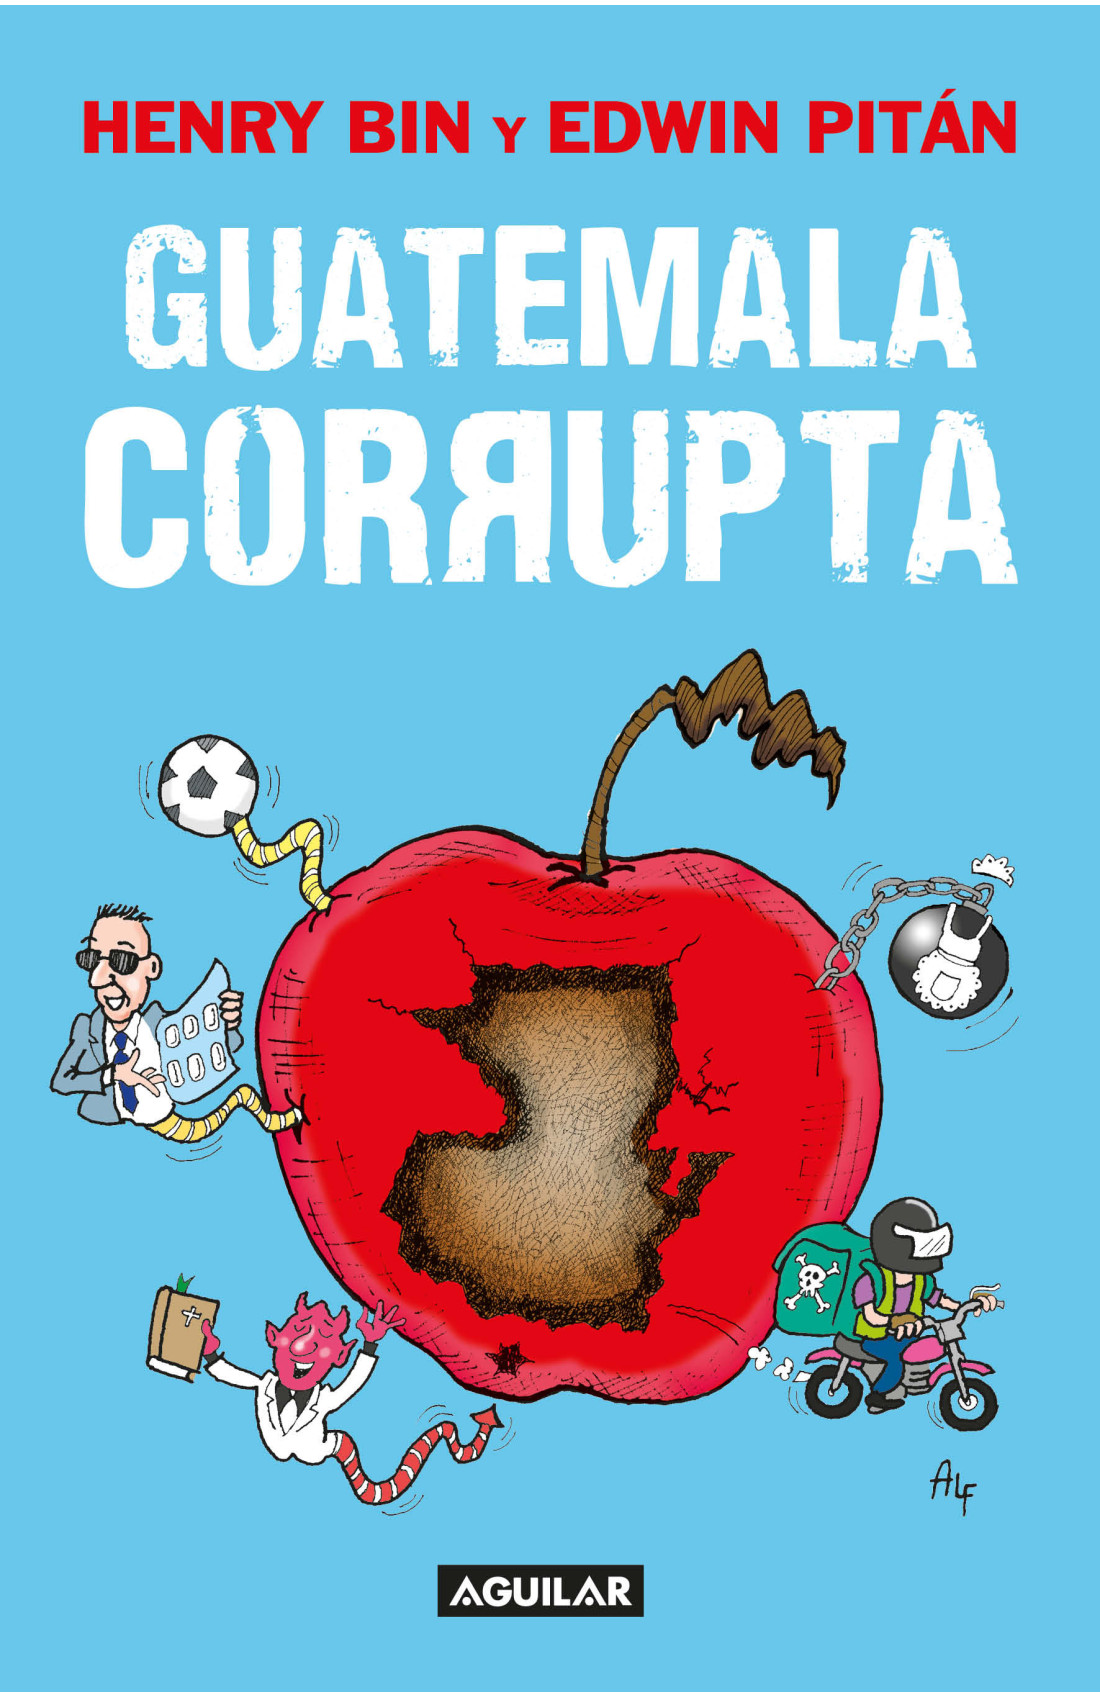 Cover of book "Guatemala corrupta"; The cover is blue with a red rotten apple in the center